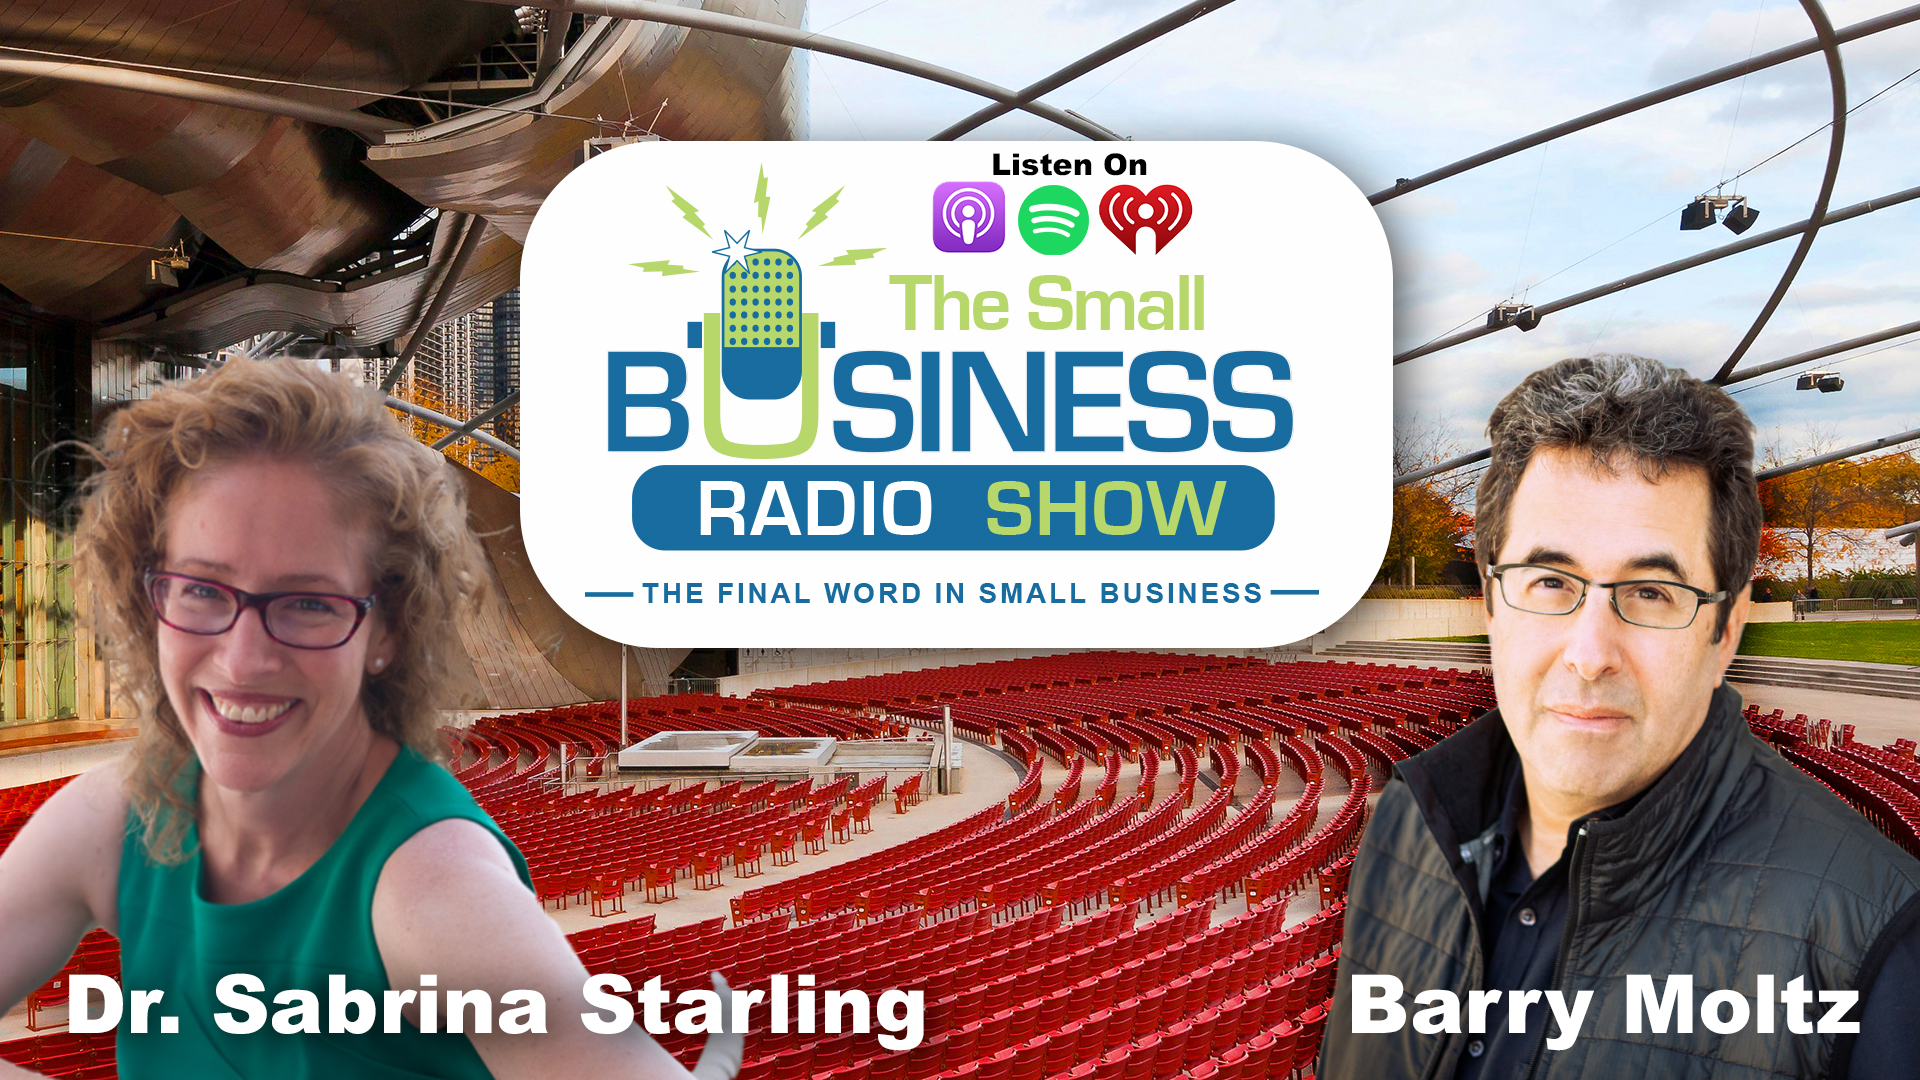 Dr. Sabrina Starling on The Small Business Radio Show